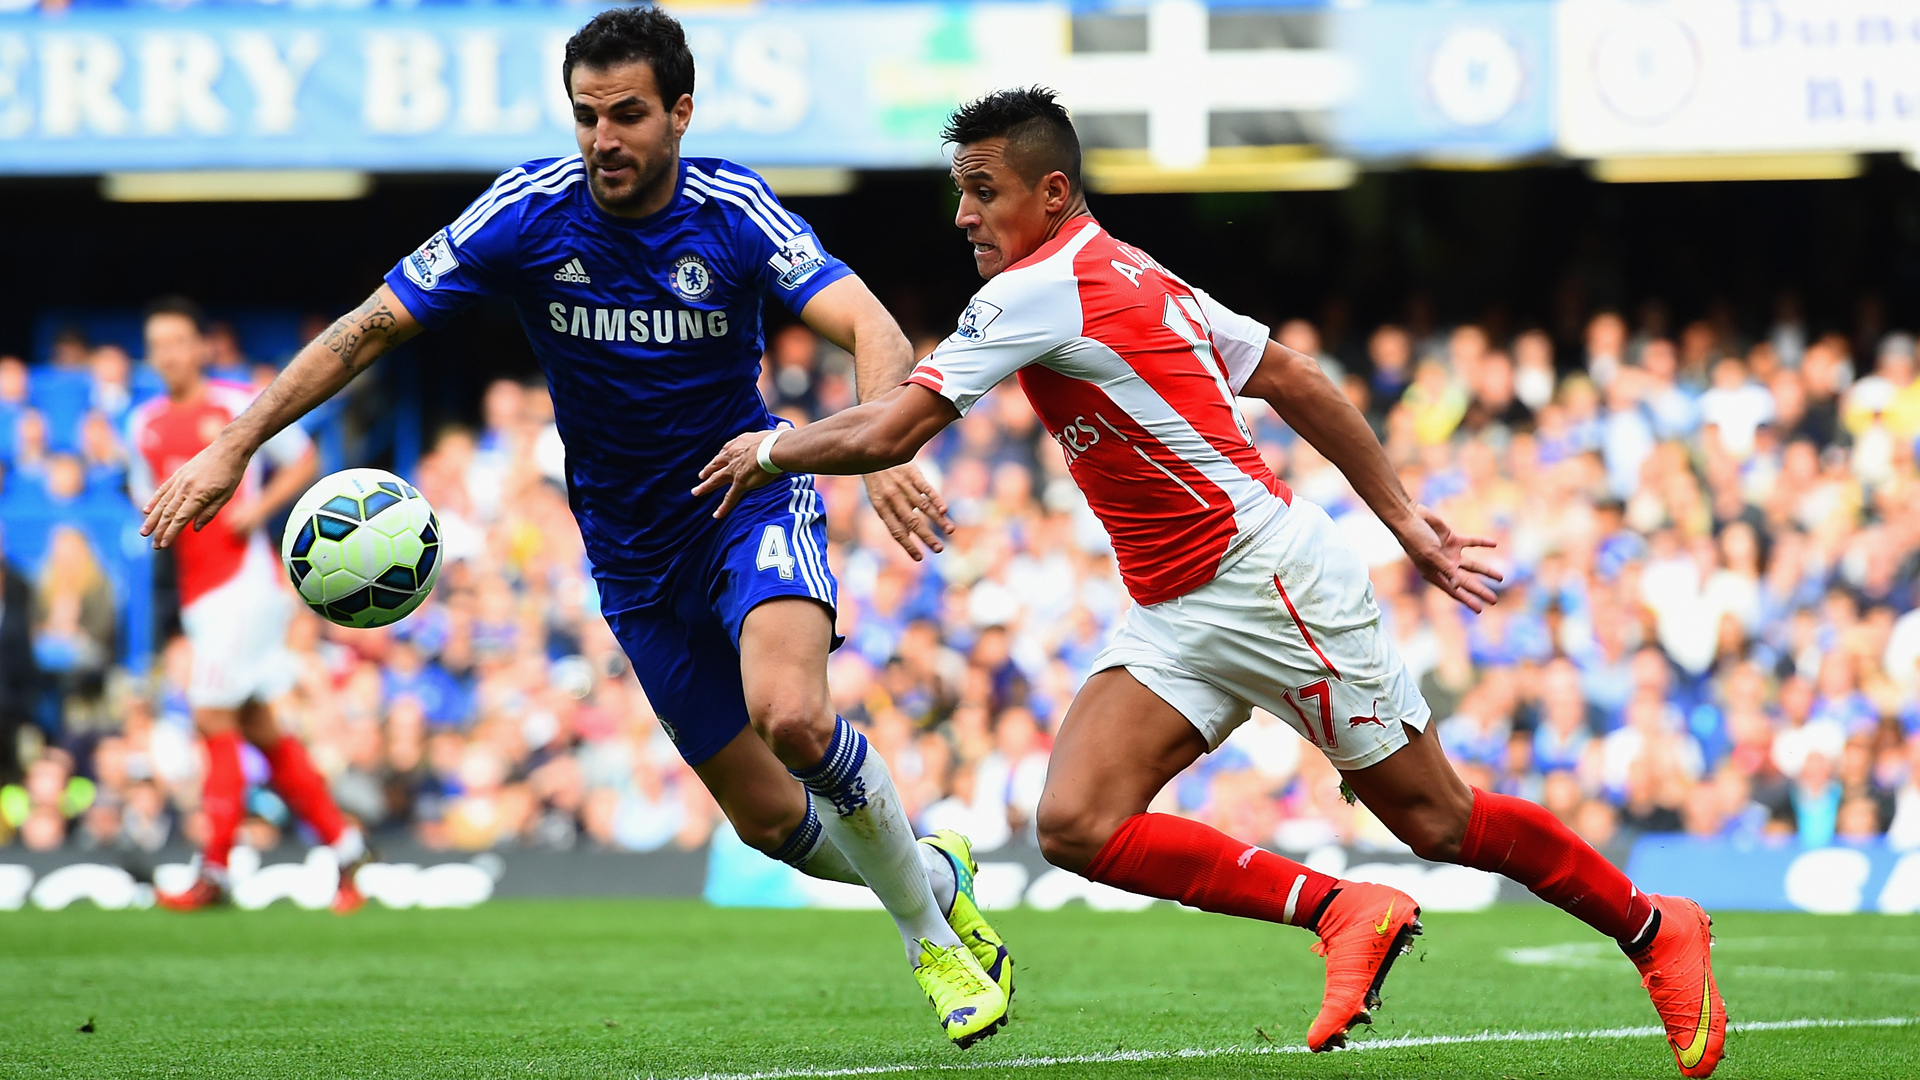 LONDON, ENGLAND - OCTOBER 05:  Cesc Fabregas of Chelsea and Alexis Sanchez of Arsenal battle for the ball during the Barclays Premier League match between Chelsea and Arsenal at Stamford Bridge on October 4, 2014 in London, England.  (Photo by Shaun Botterill/Getty Images)